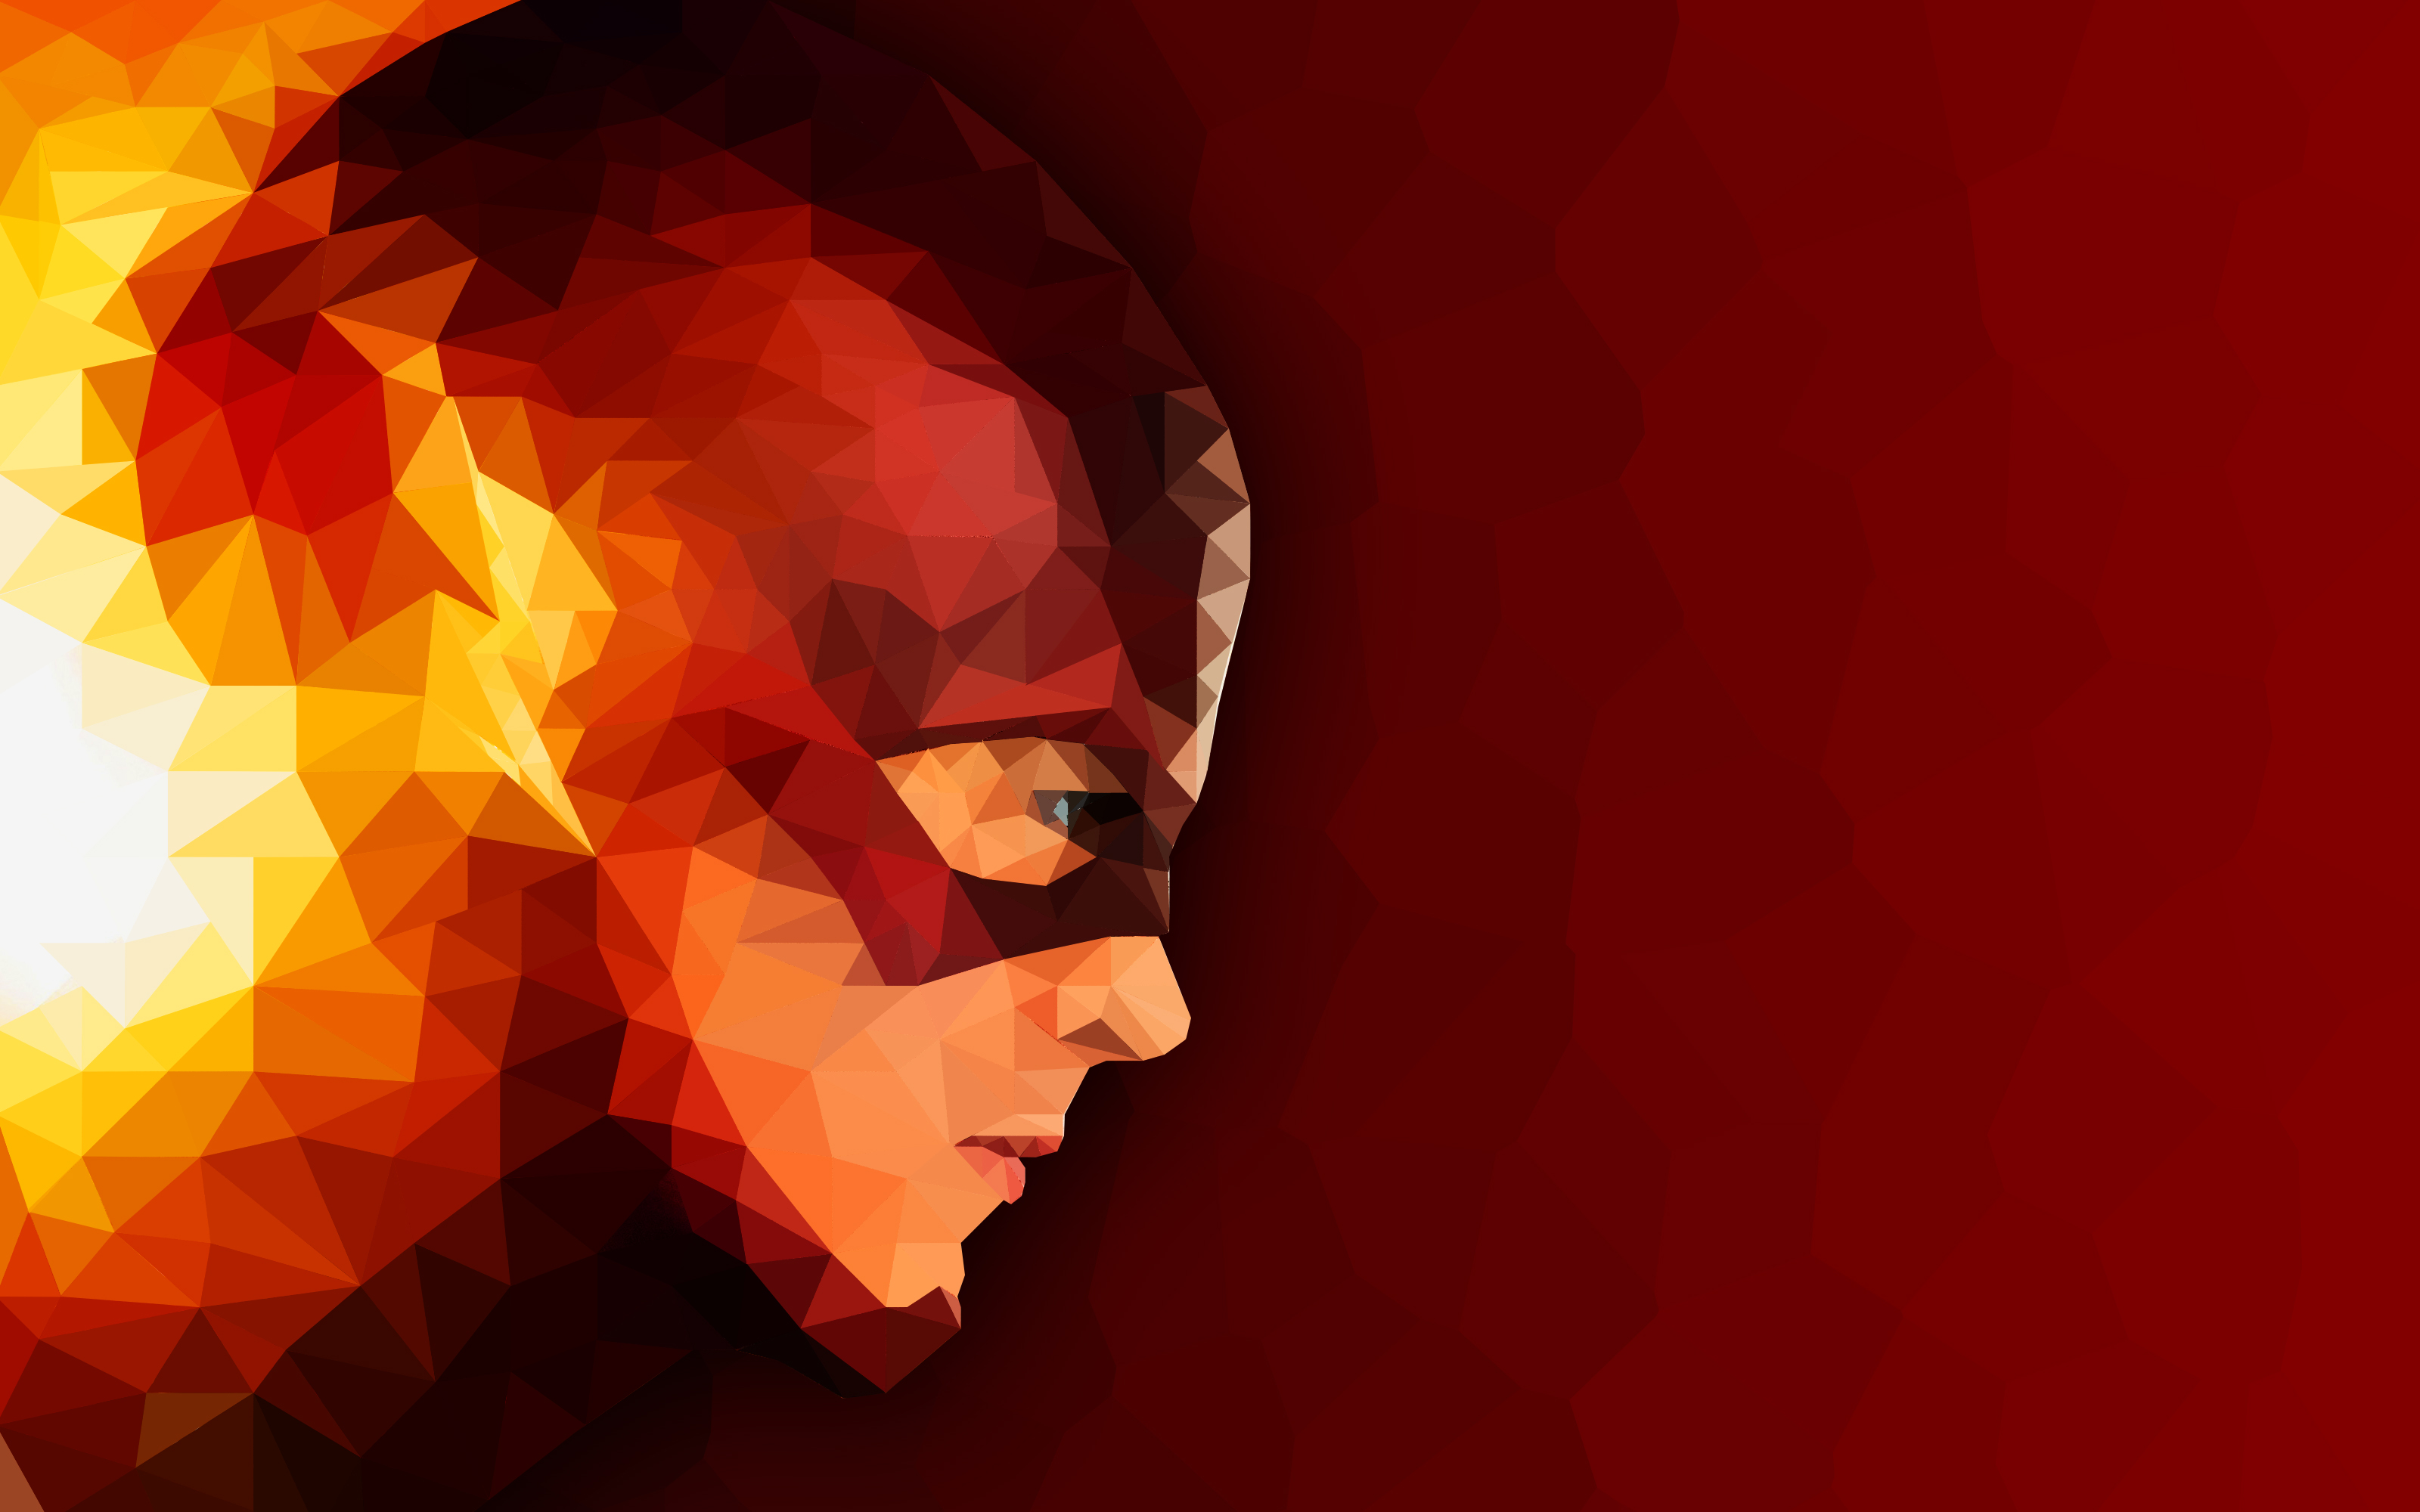 The Flash Low poly Artwork902874668 - The Flash Low poly Artwork - The, poly, Low, Flash, CGI, Artwork